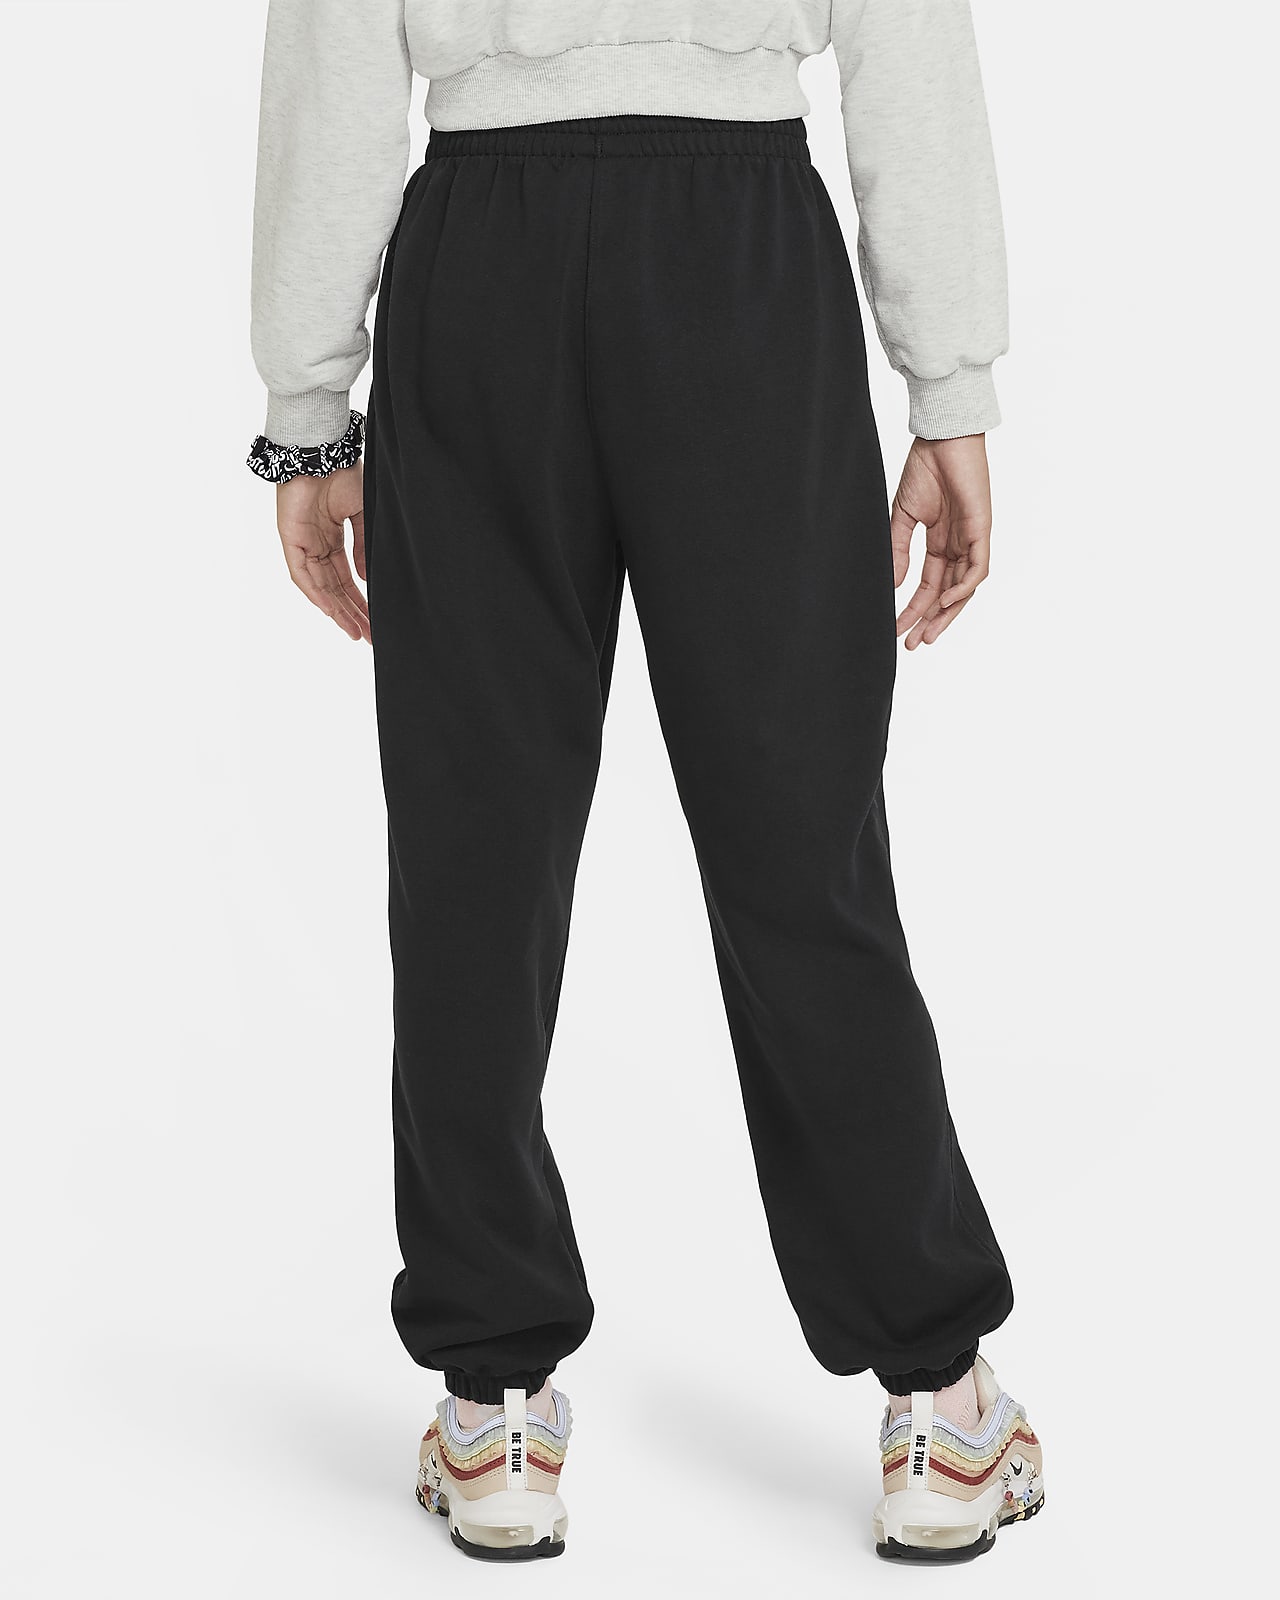 Buy Nike Youth Sweatpants for Girls Online Malaysia